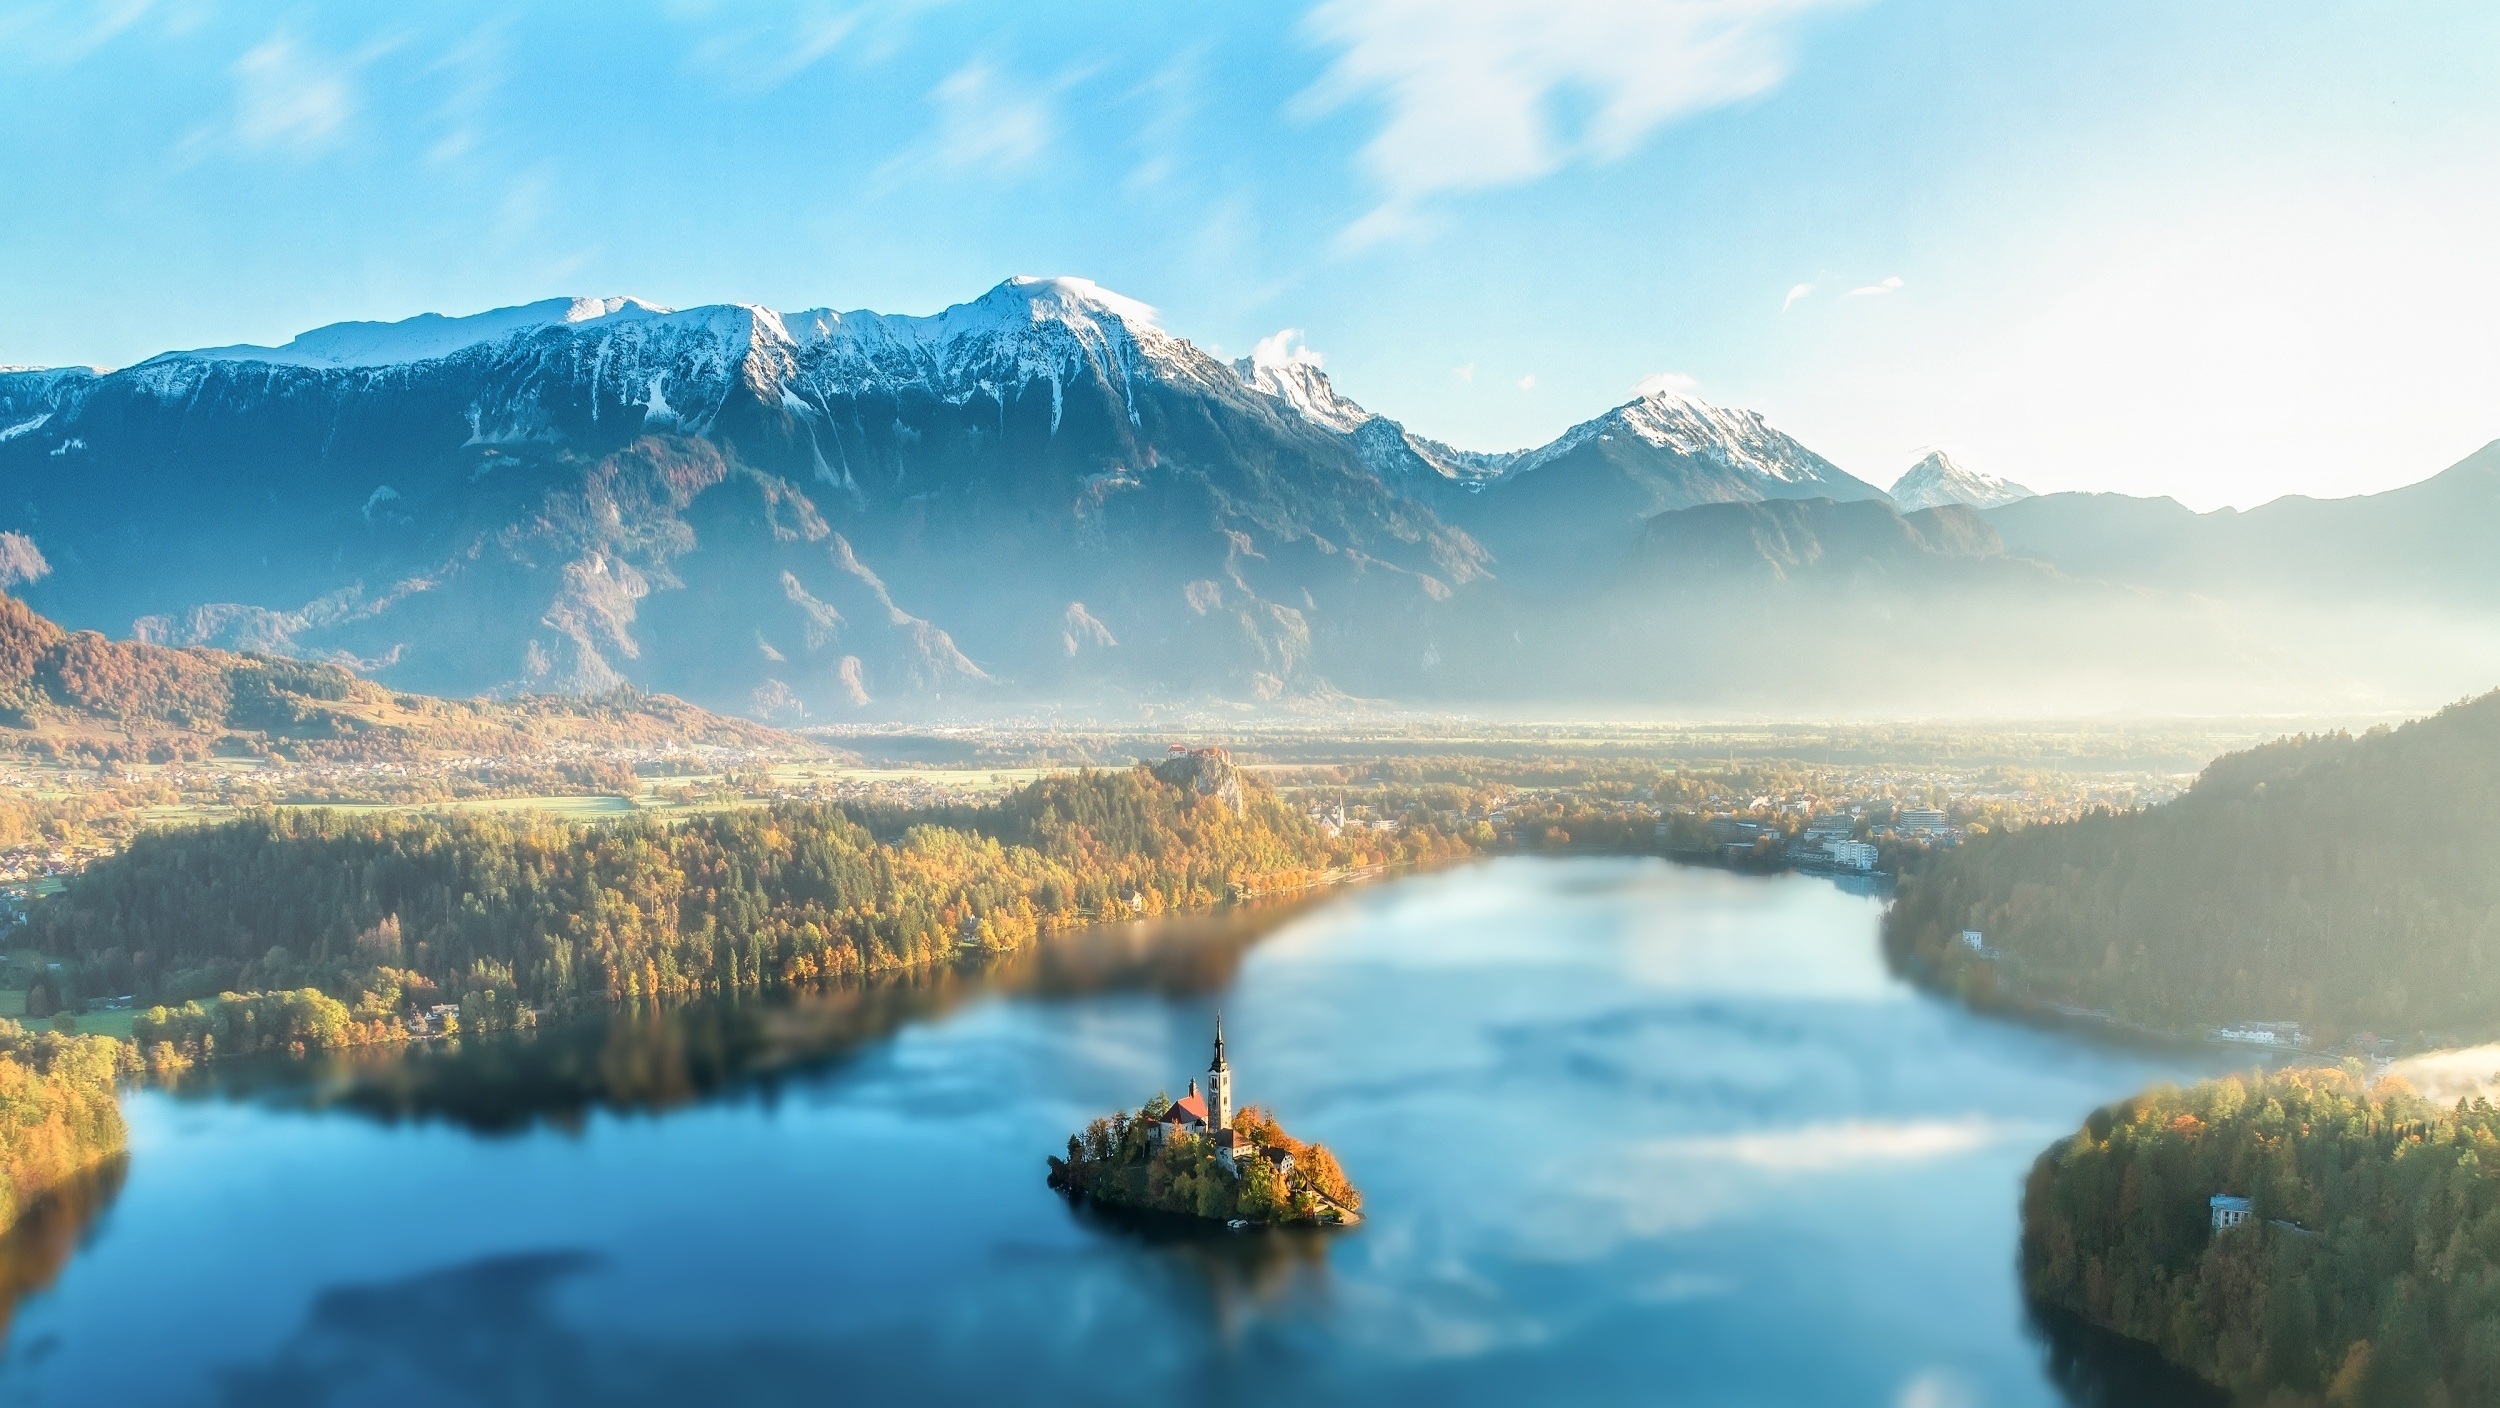 General 2500x1408 landscape lake Slovenia Lake Bled forest mist church snowy peak mountains clouds dawn hills nature outdoors reflection pine trees snow sunset water cyan island sky